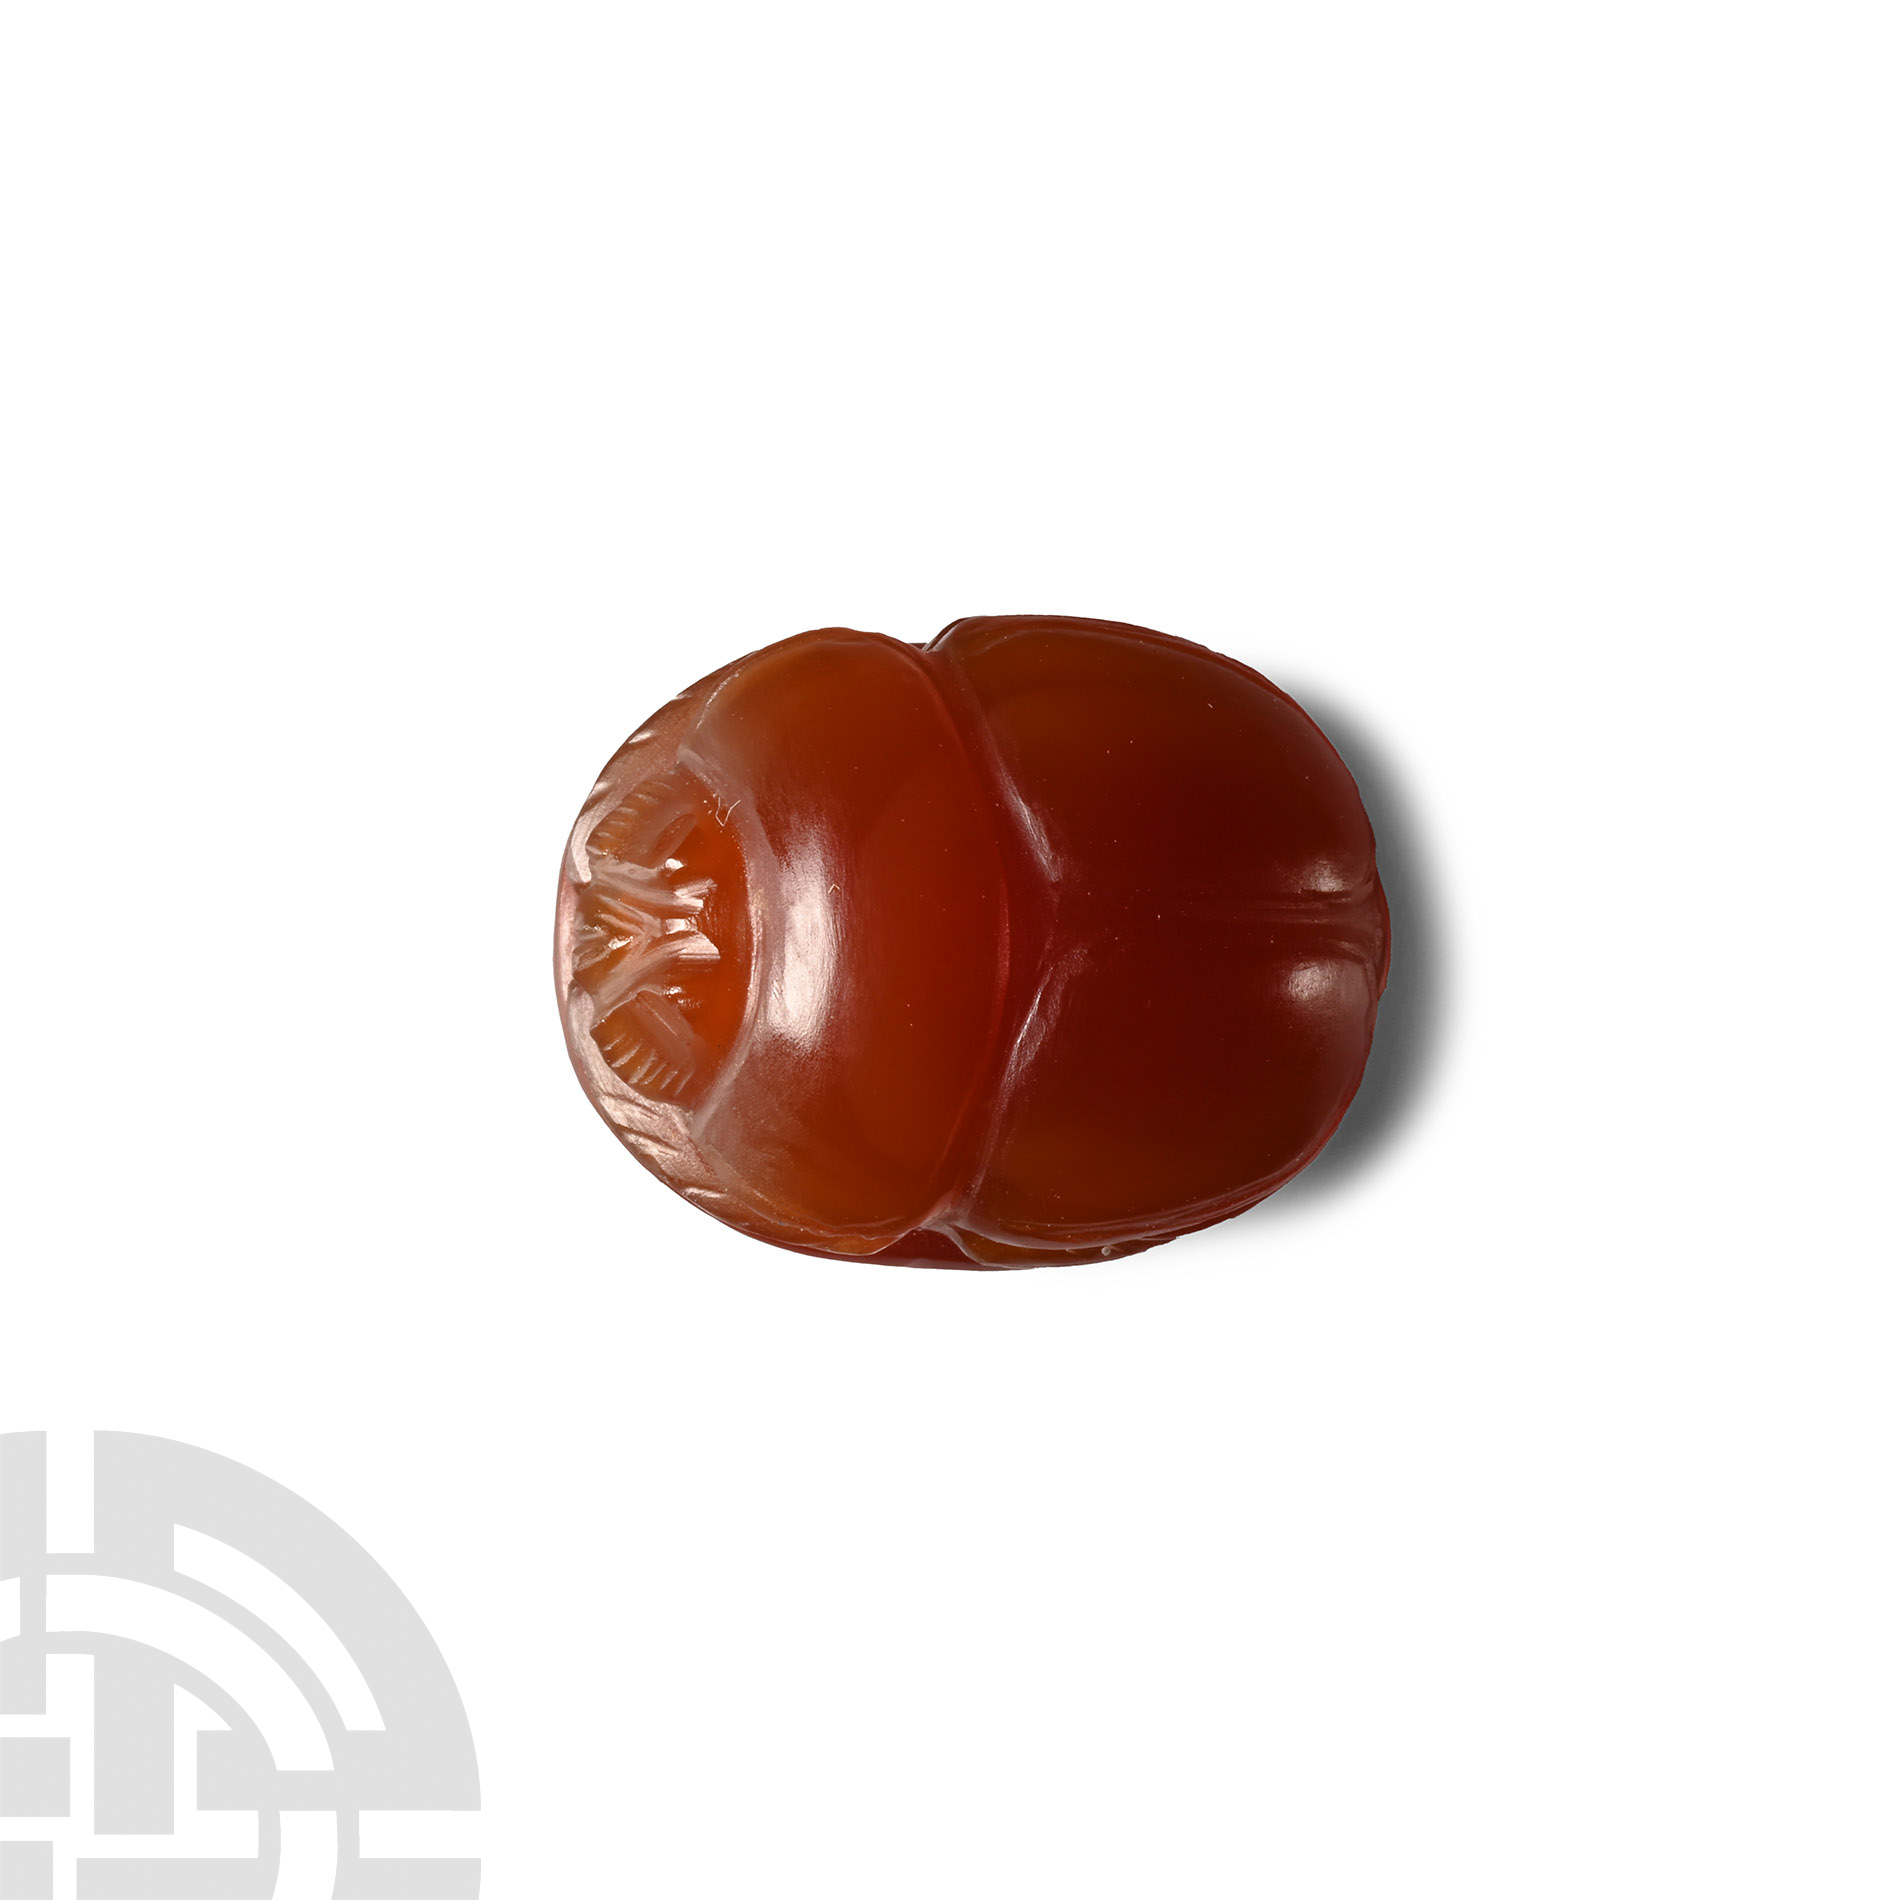 Egyptian Carnelian Scarab with Symbols Representing the Royal Title 'King of Upper and Lower Egypt - Image 3 of 3